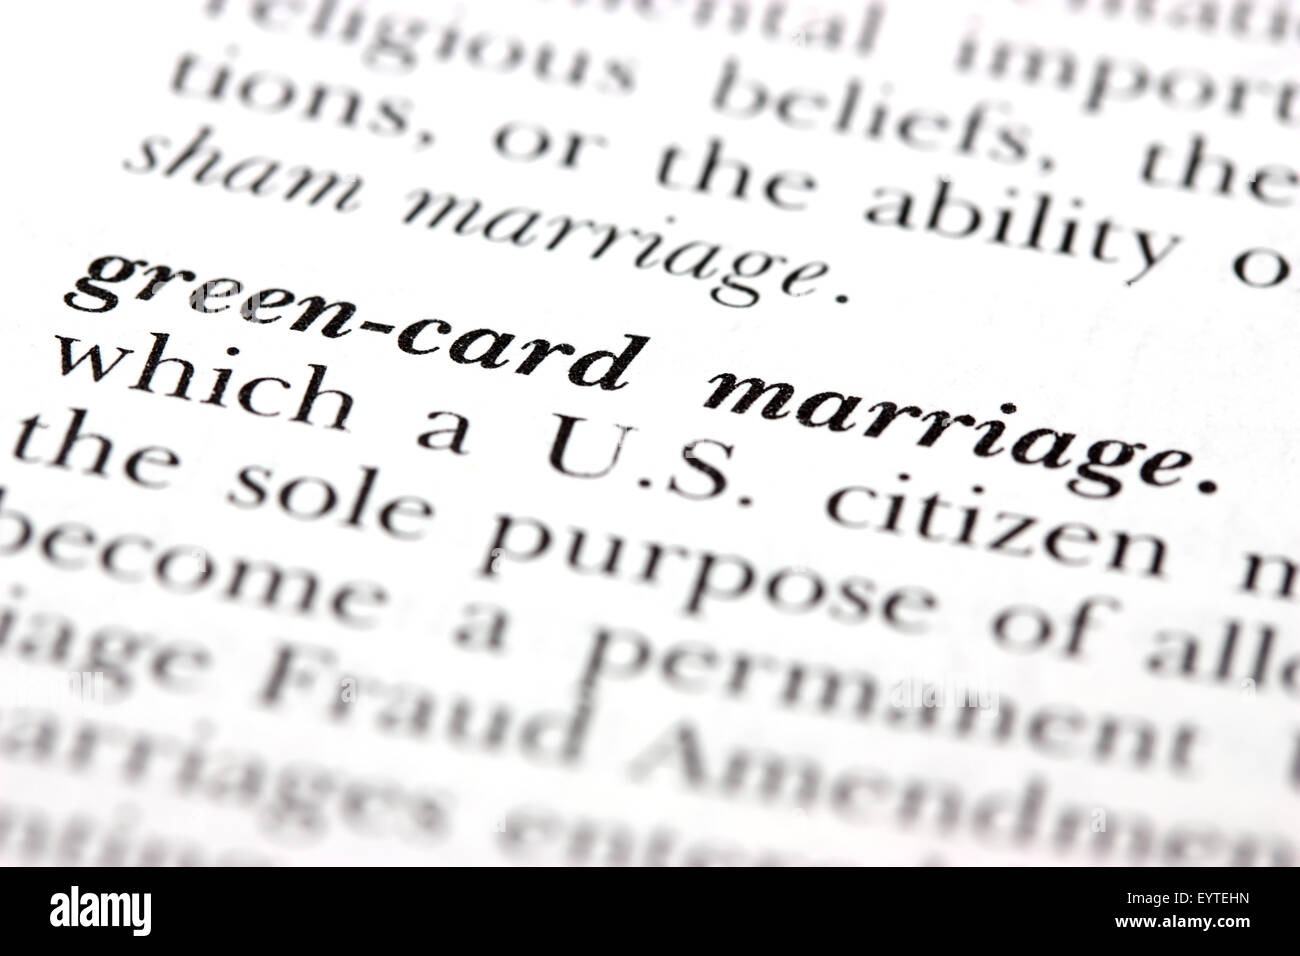 Dictionary word Green-card marriage Stock Photo